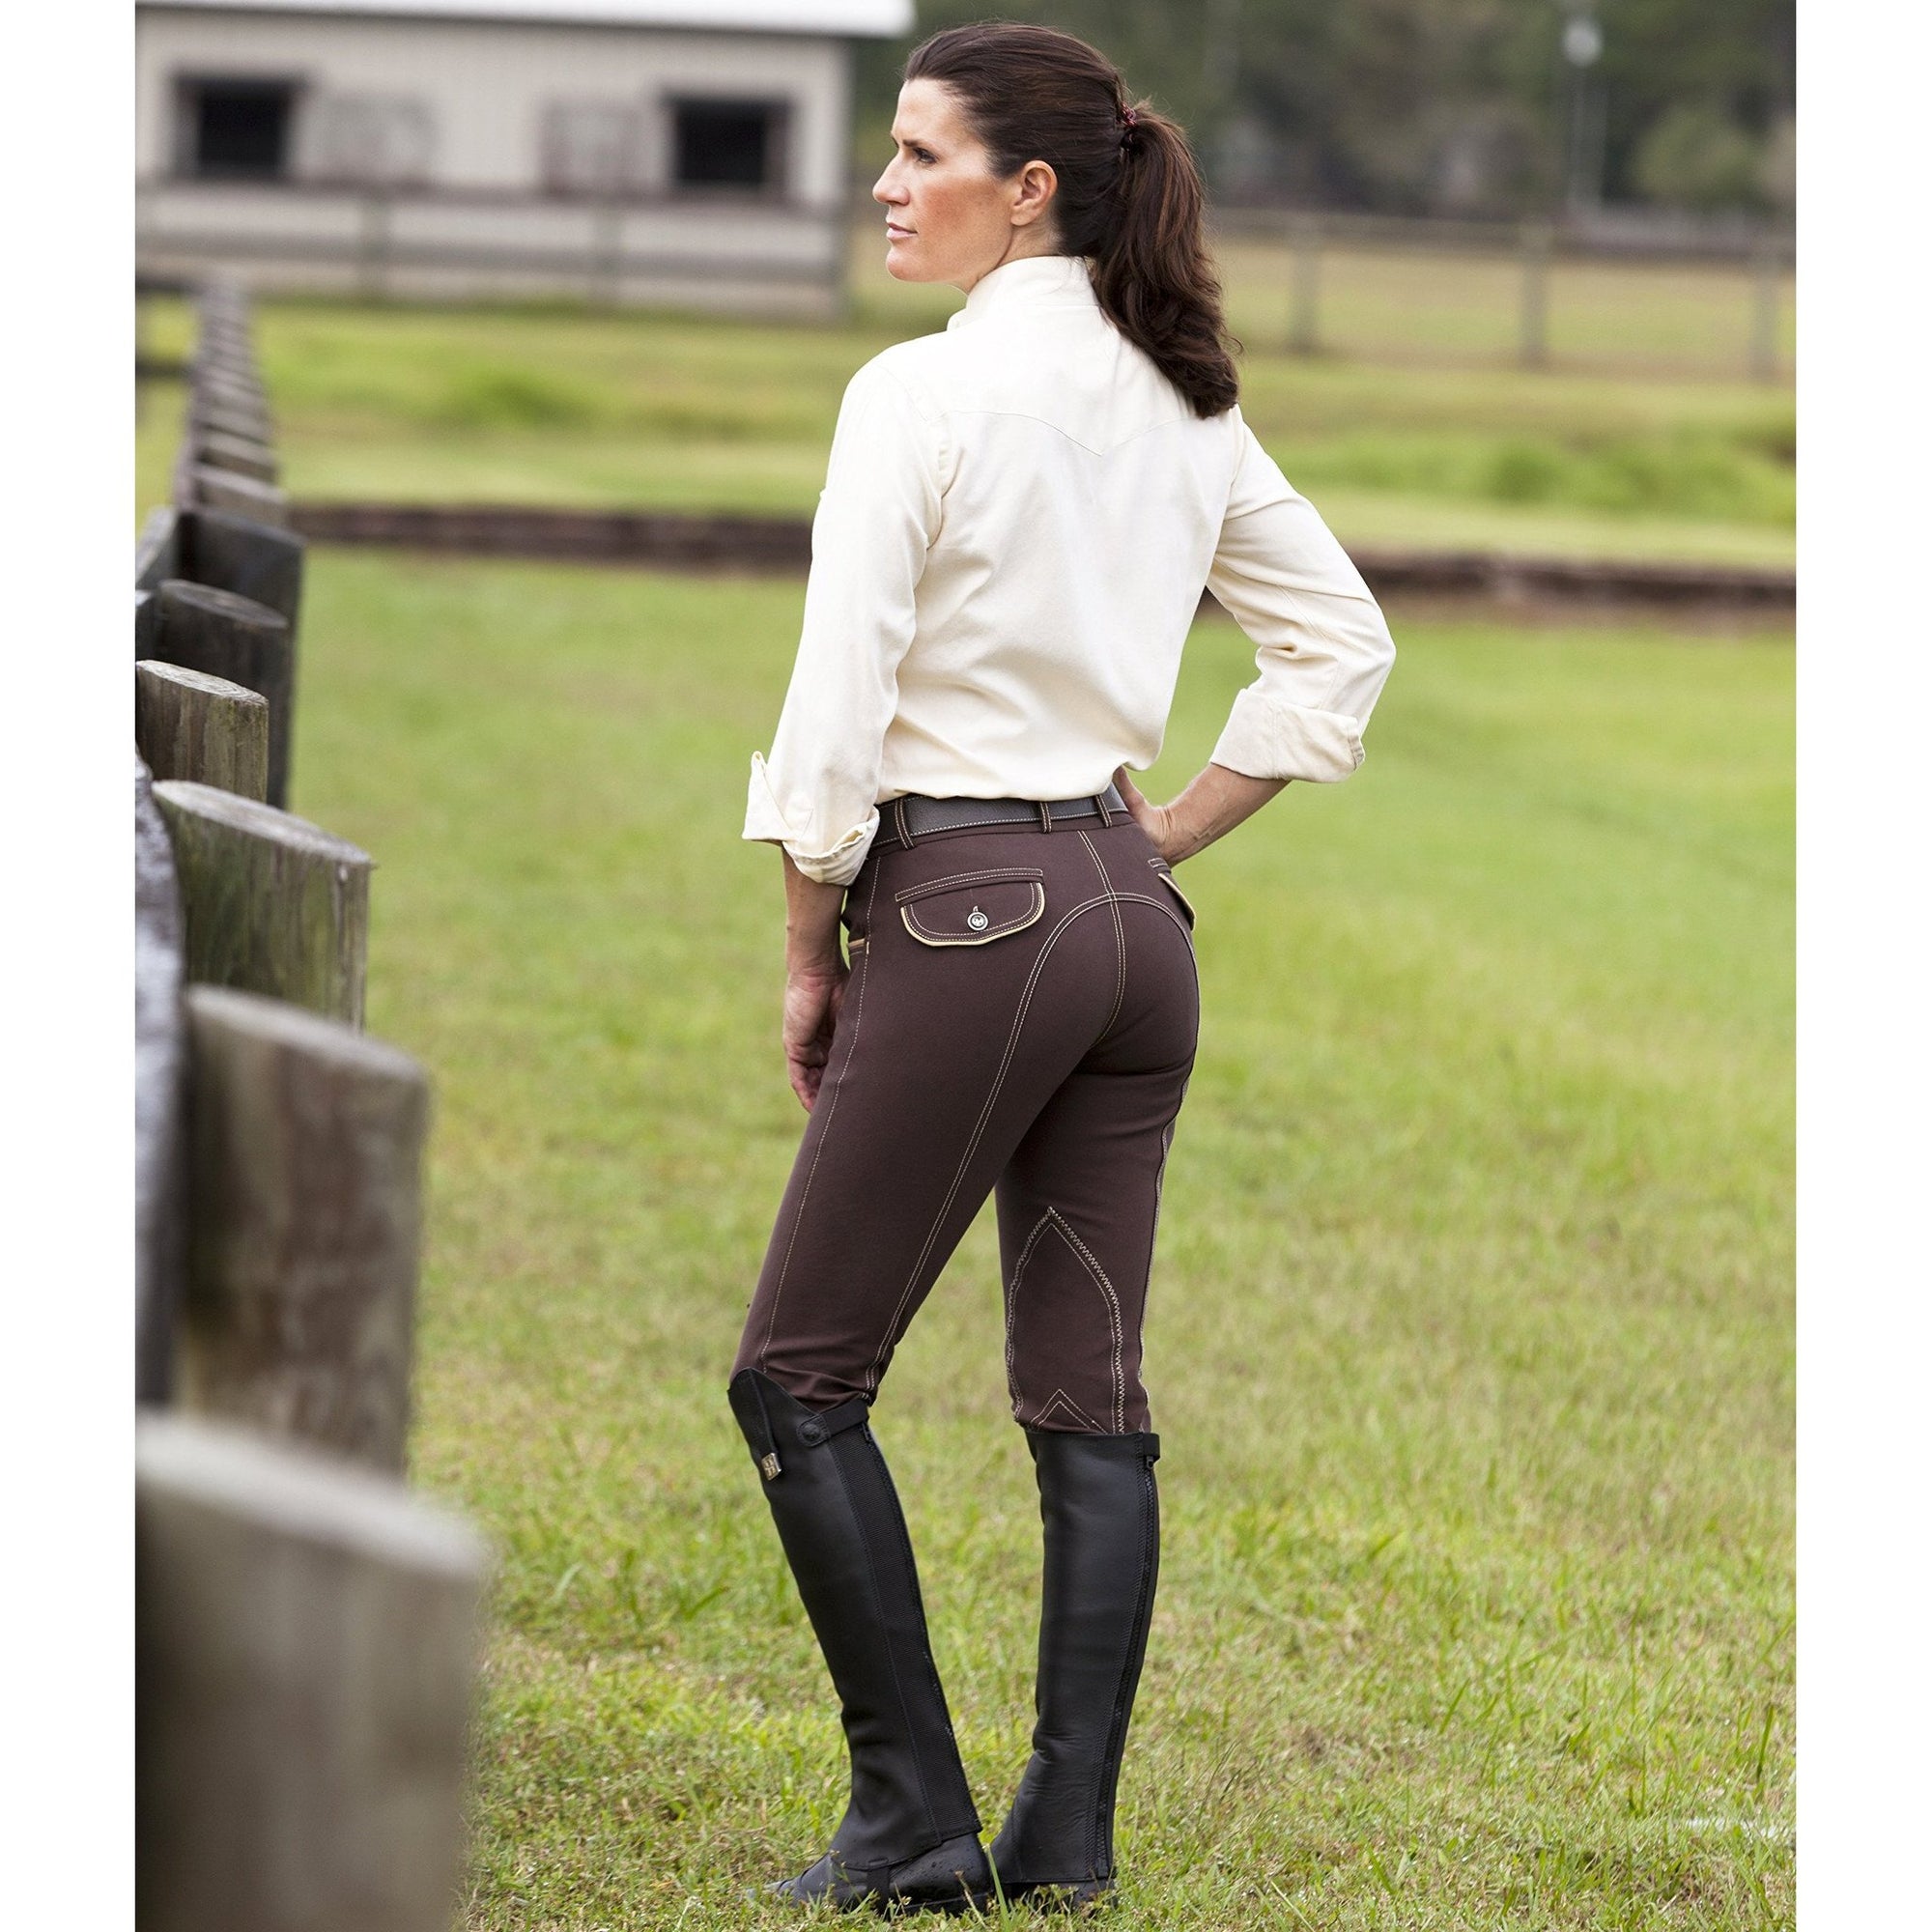 Huntley Equestrian Brown Horse Riding Pants With Tan Welt Pockets